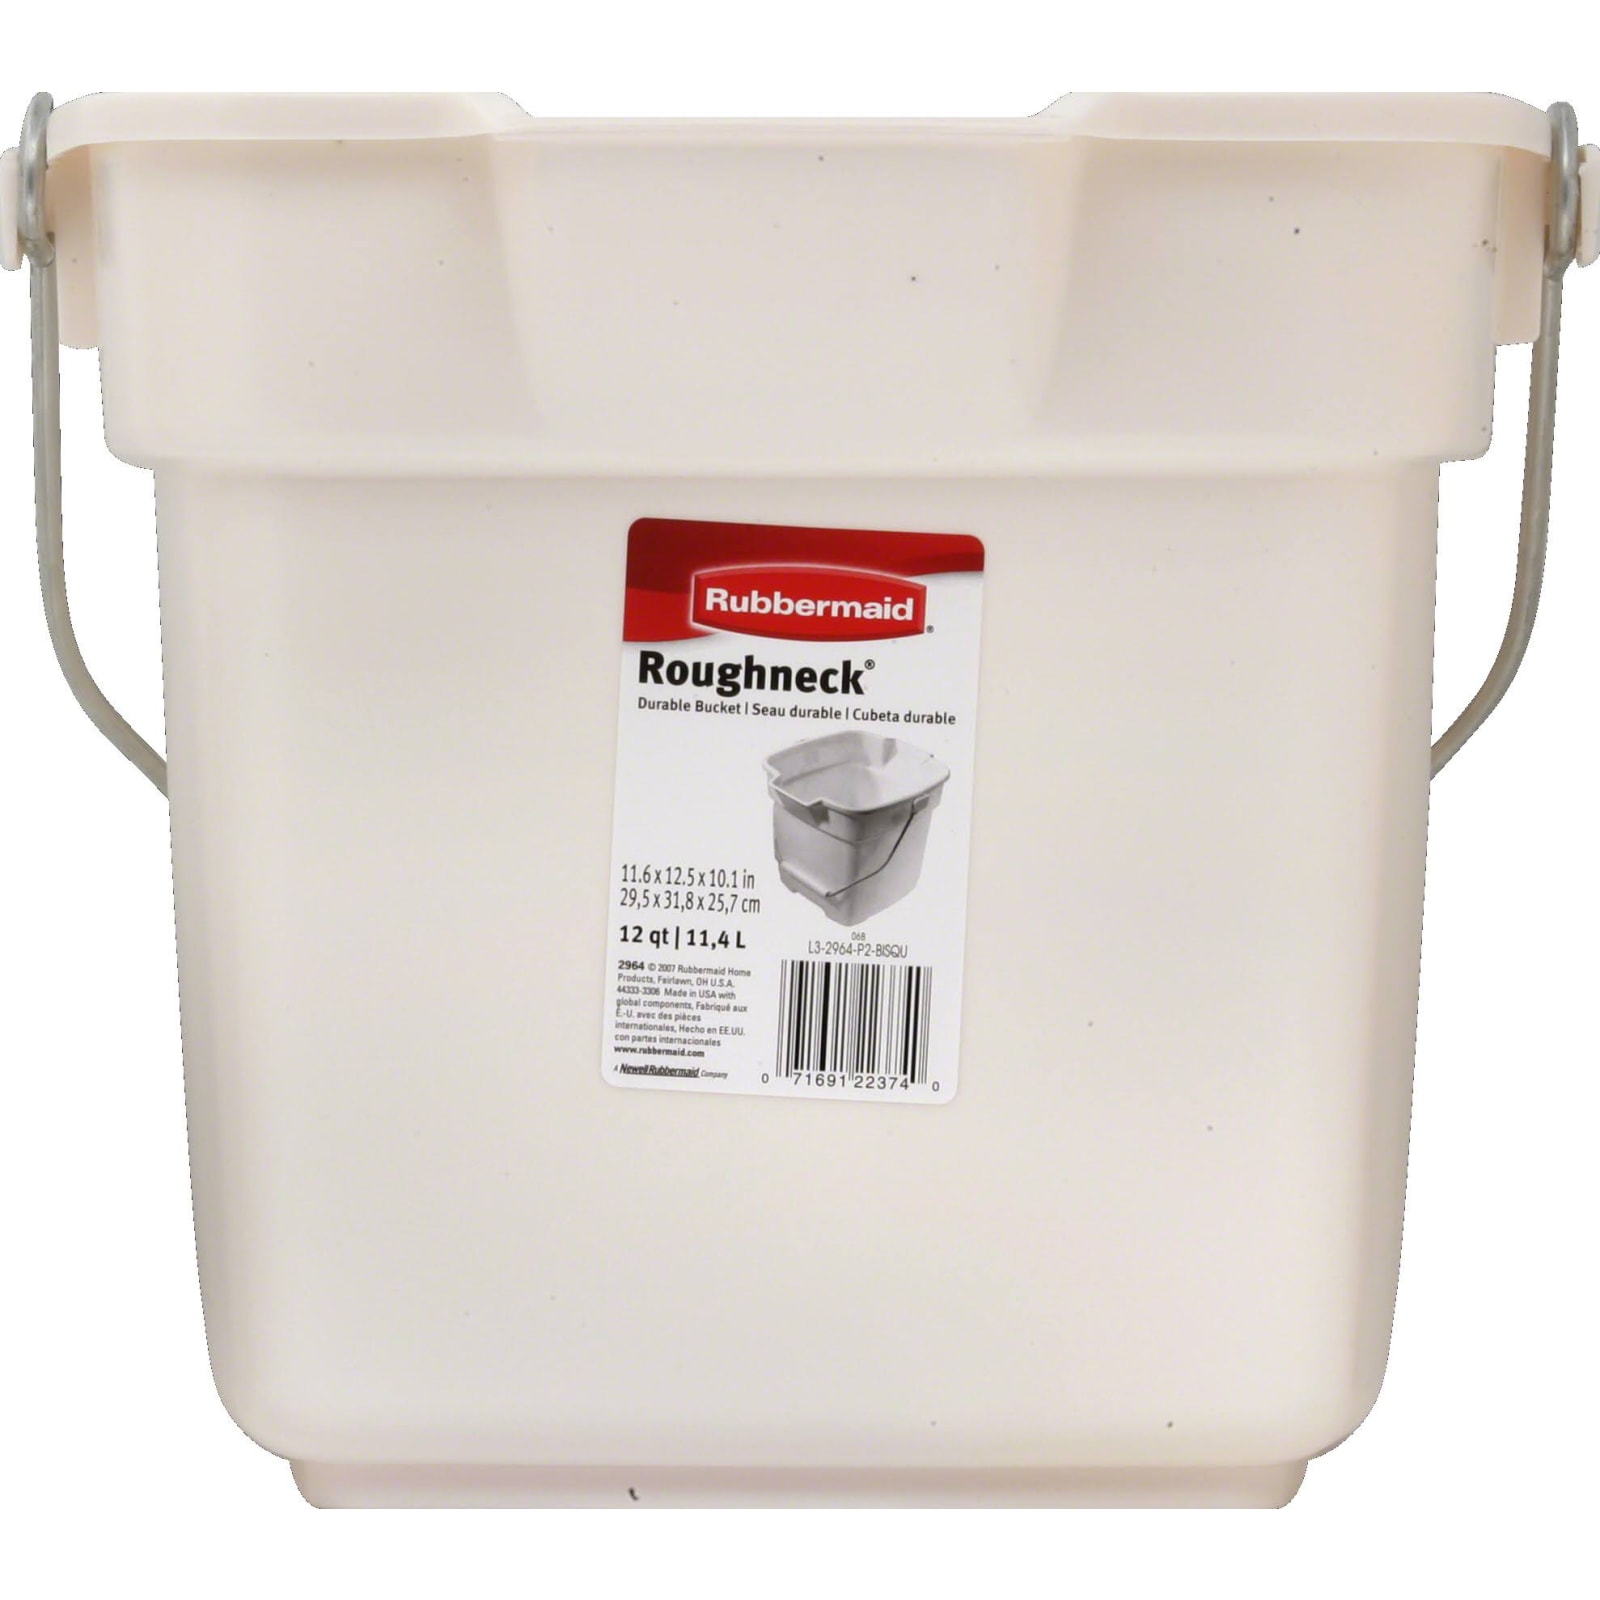 Large Cup Holder Organizer by Rubbermaid at Fleet Farm